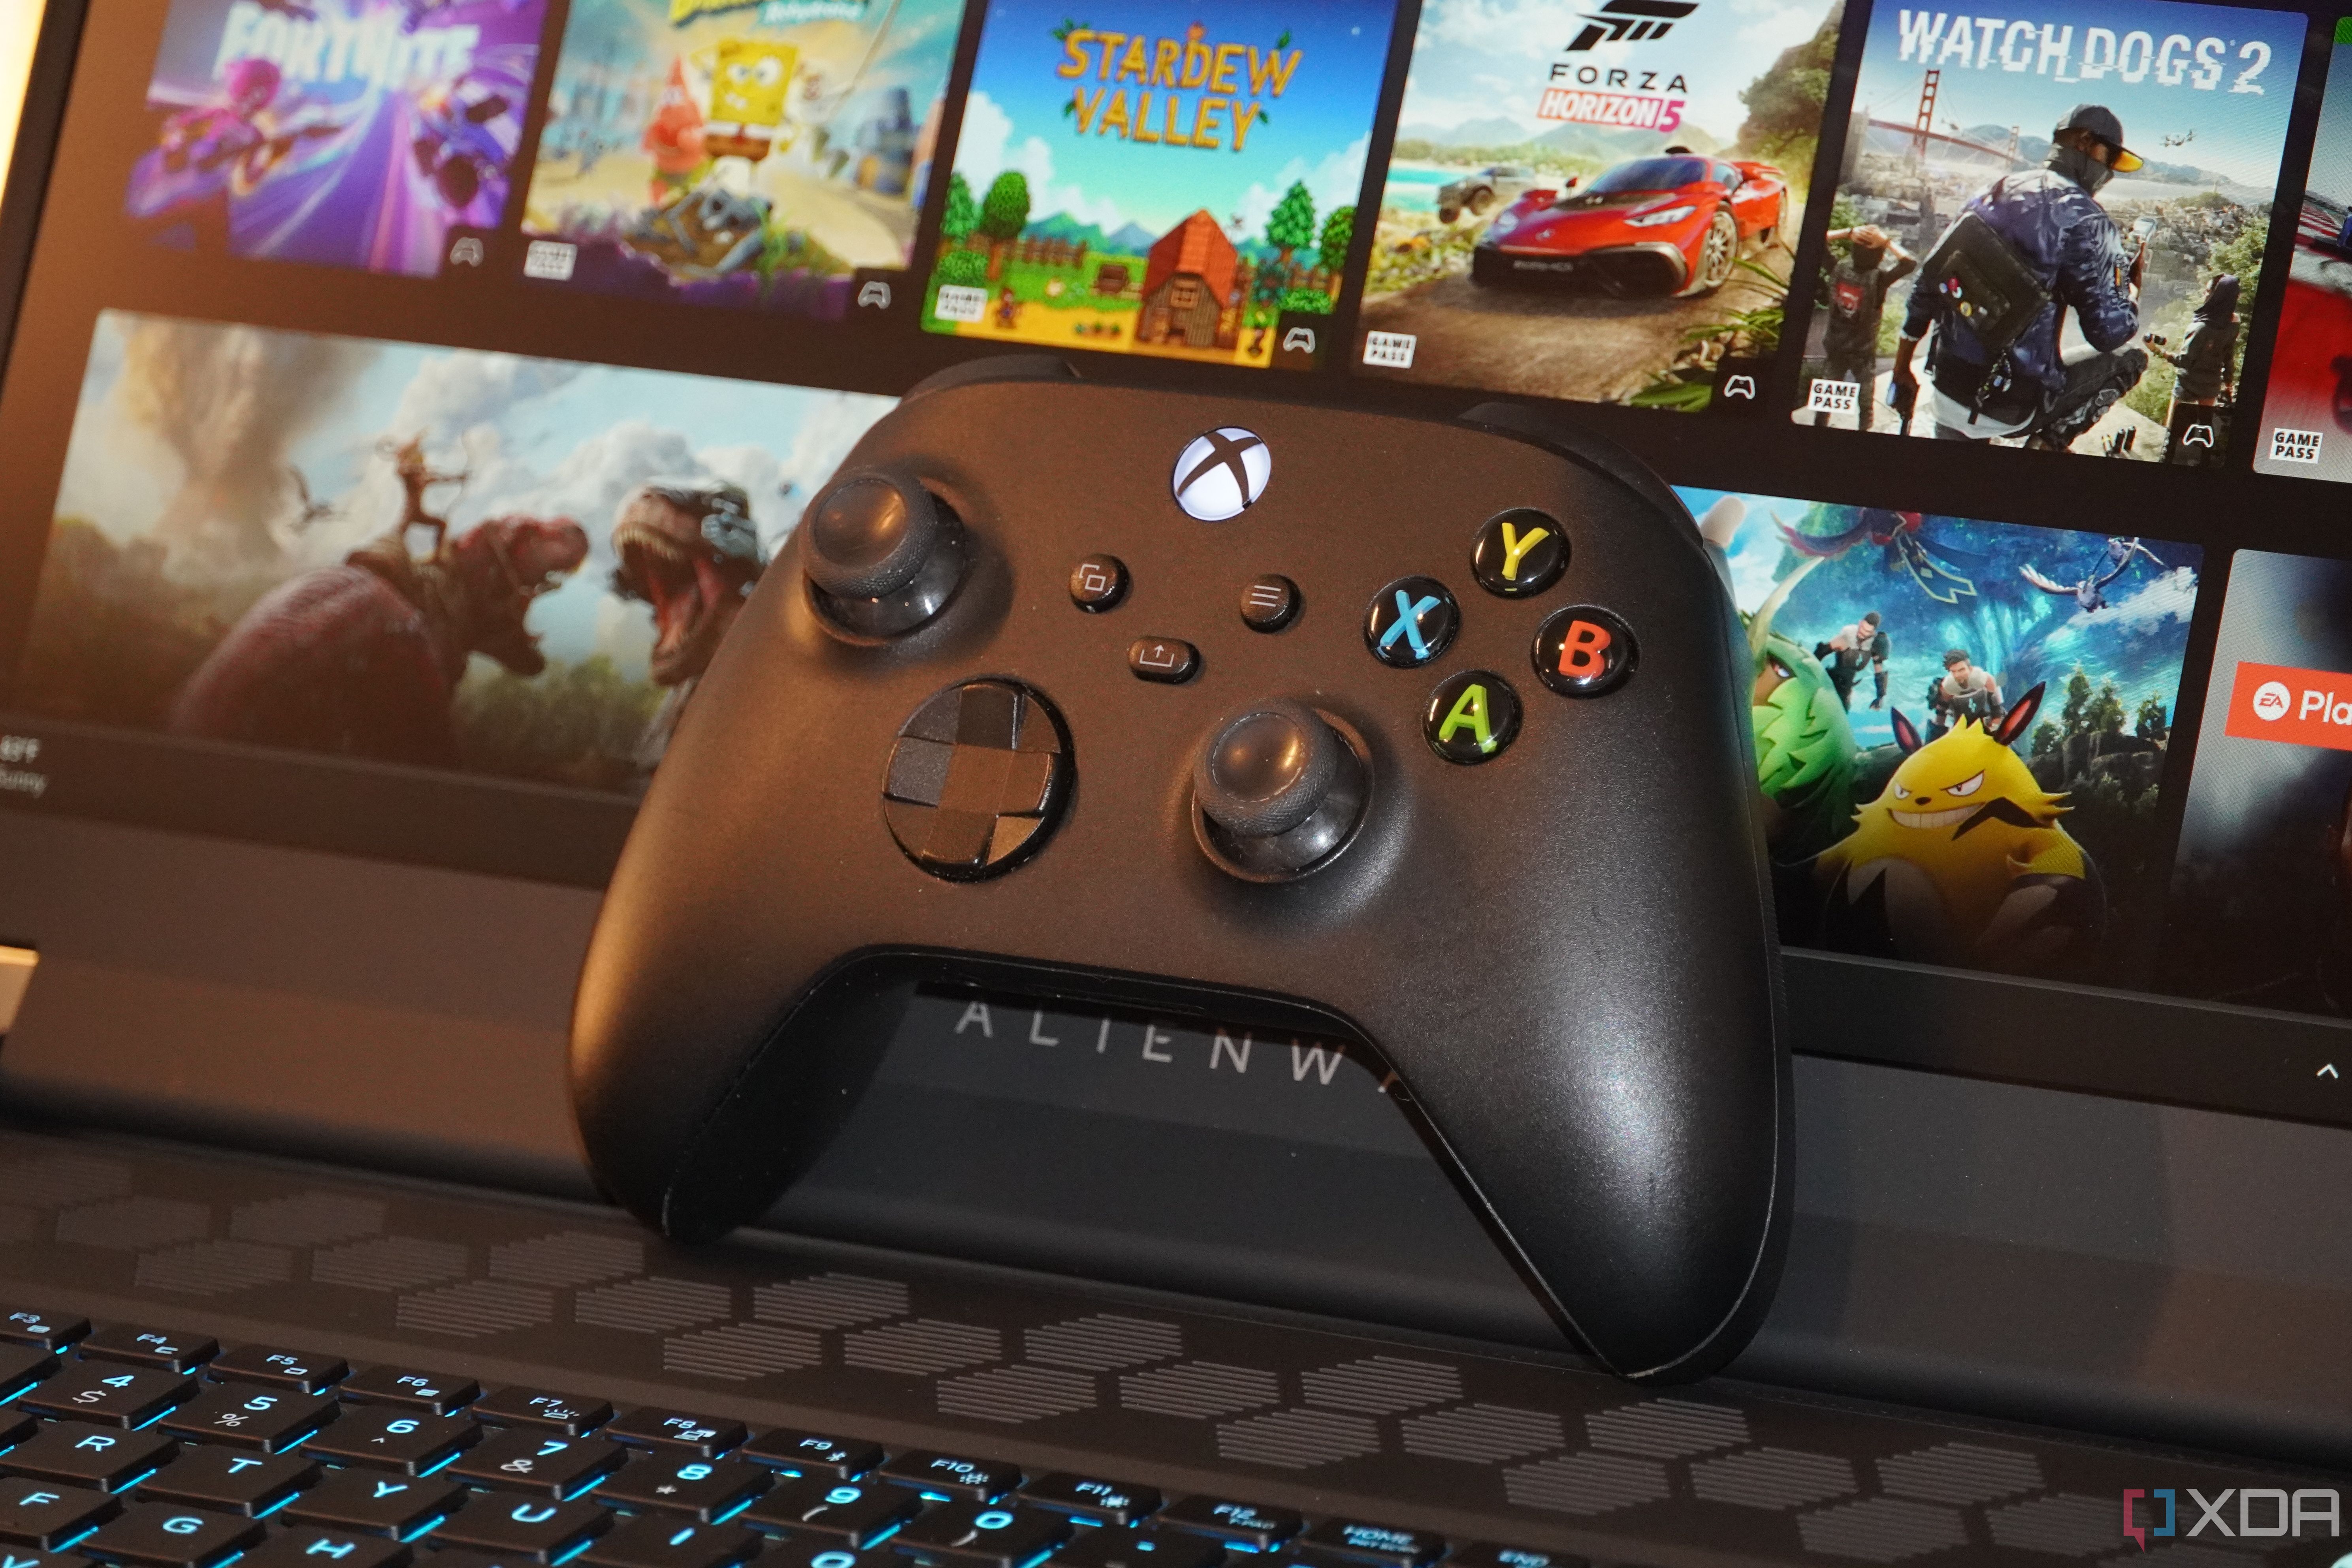 An Xbox Controller on an Alienware Gaming Laptop.